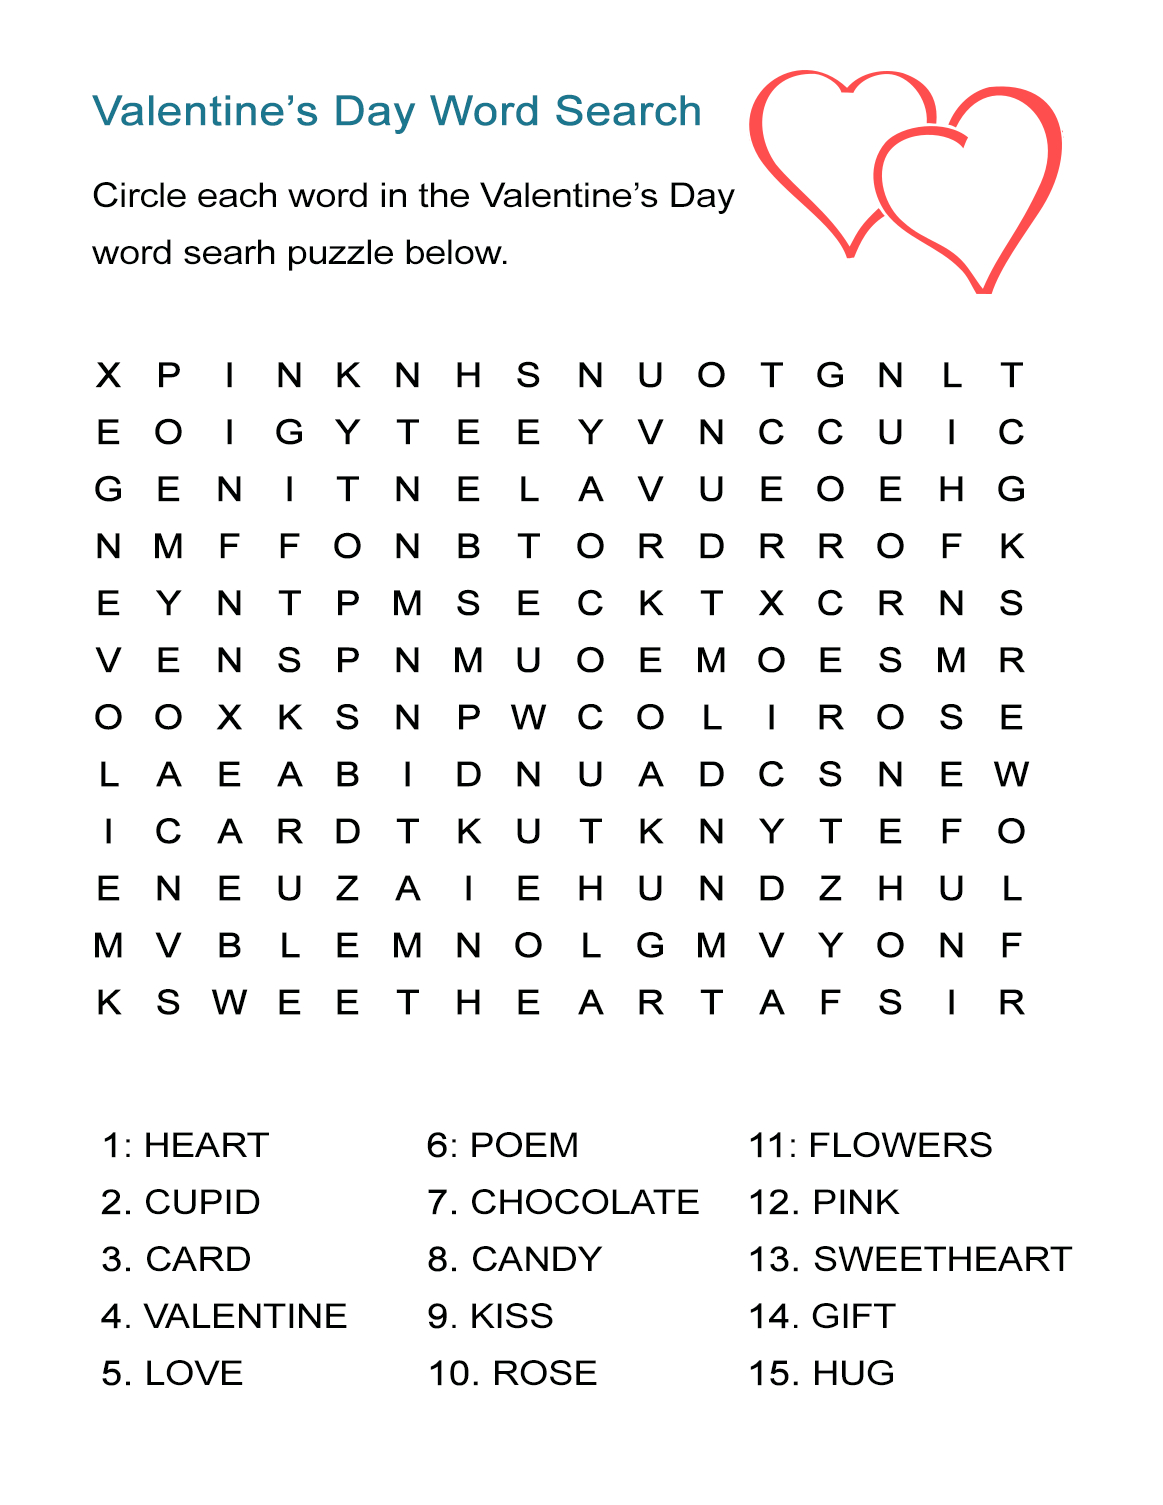 Valentine&amp;#039;s Day Word Search Puzzle: Free Worksheet For February 14 - Worksheet Word Puzzle